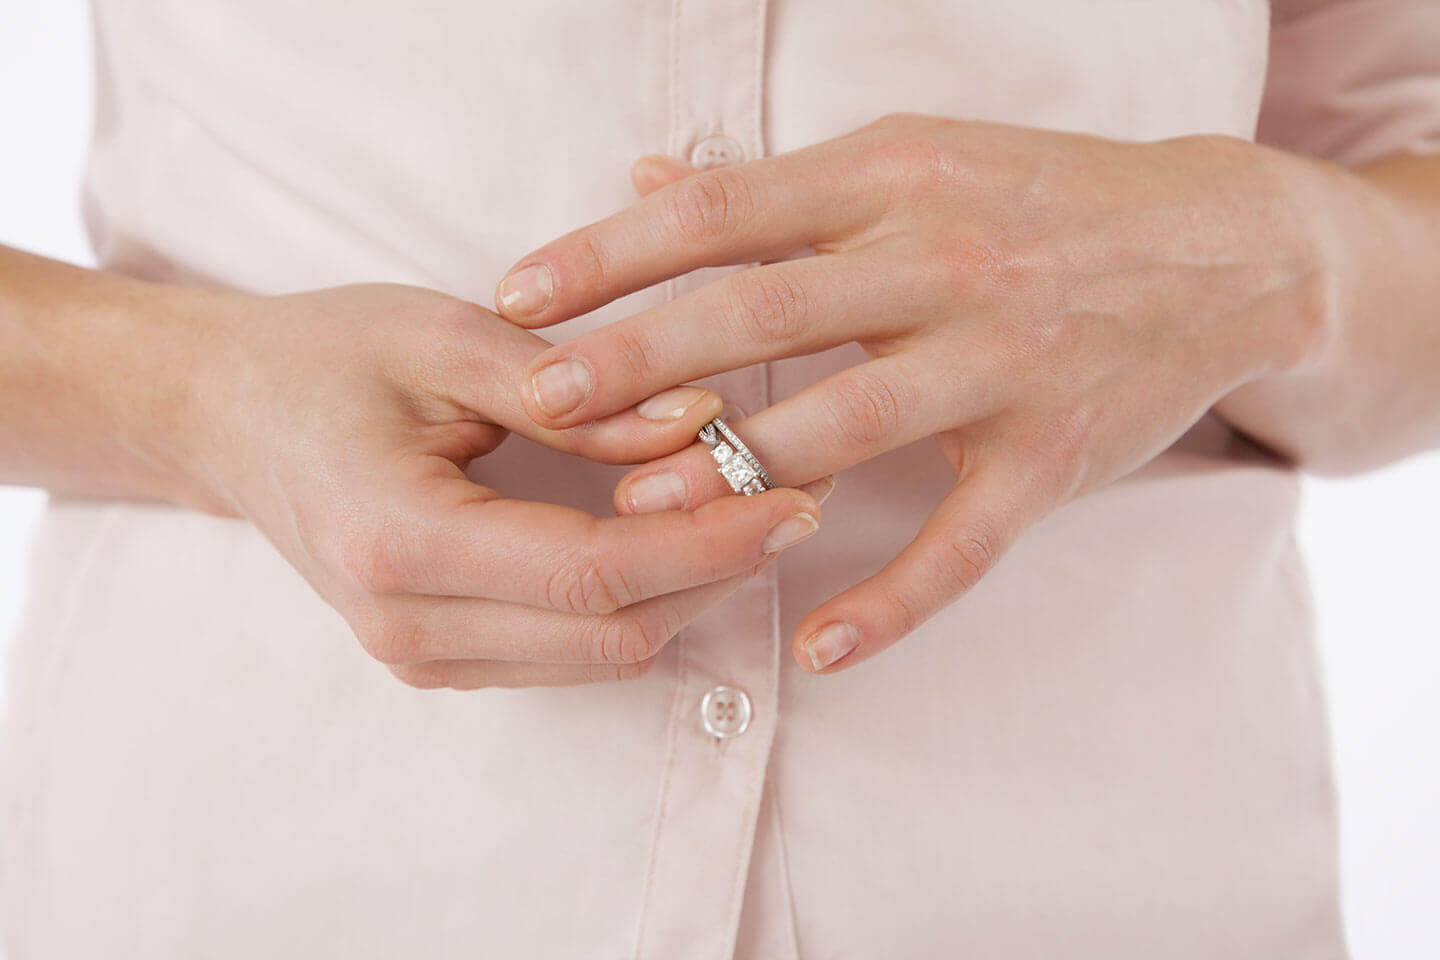 A women going through a divorce removing her wedding ring